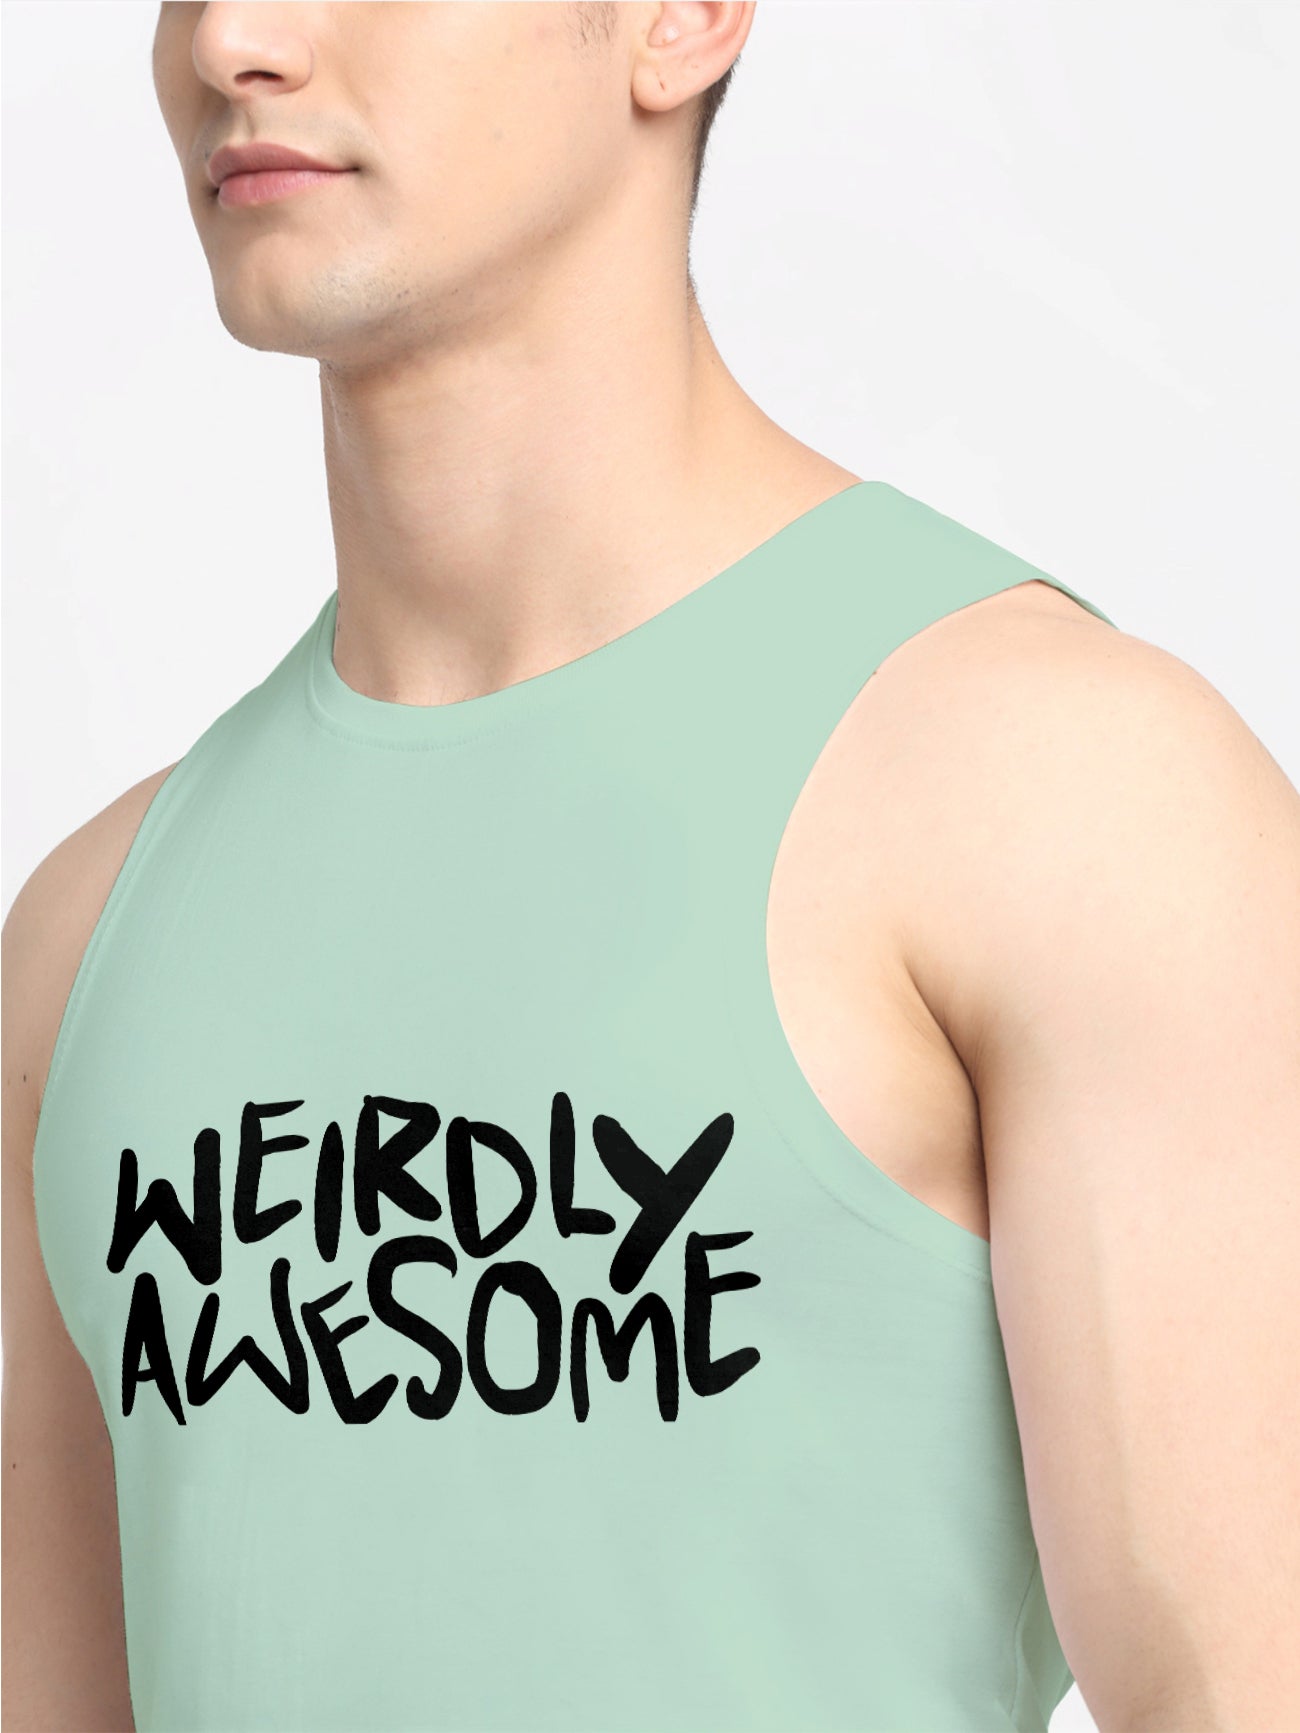 Men's Weirdly Awesome Round Neck Sports Gym Vest - Friskers